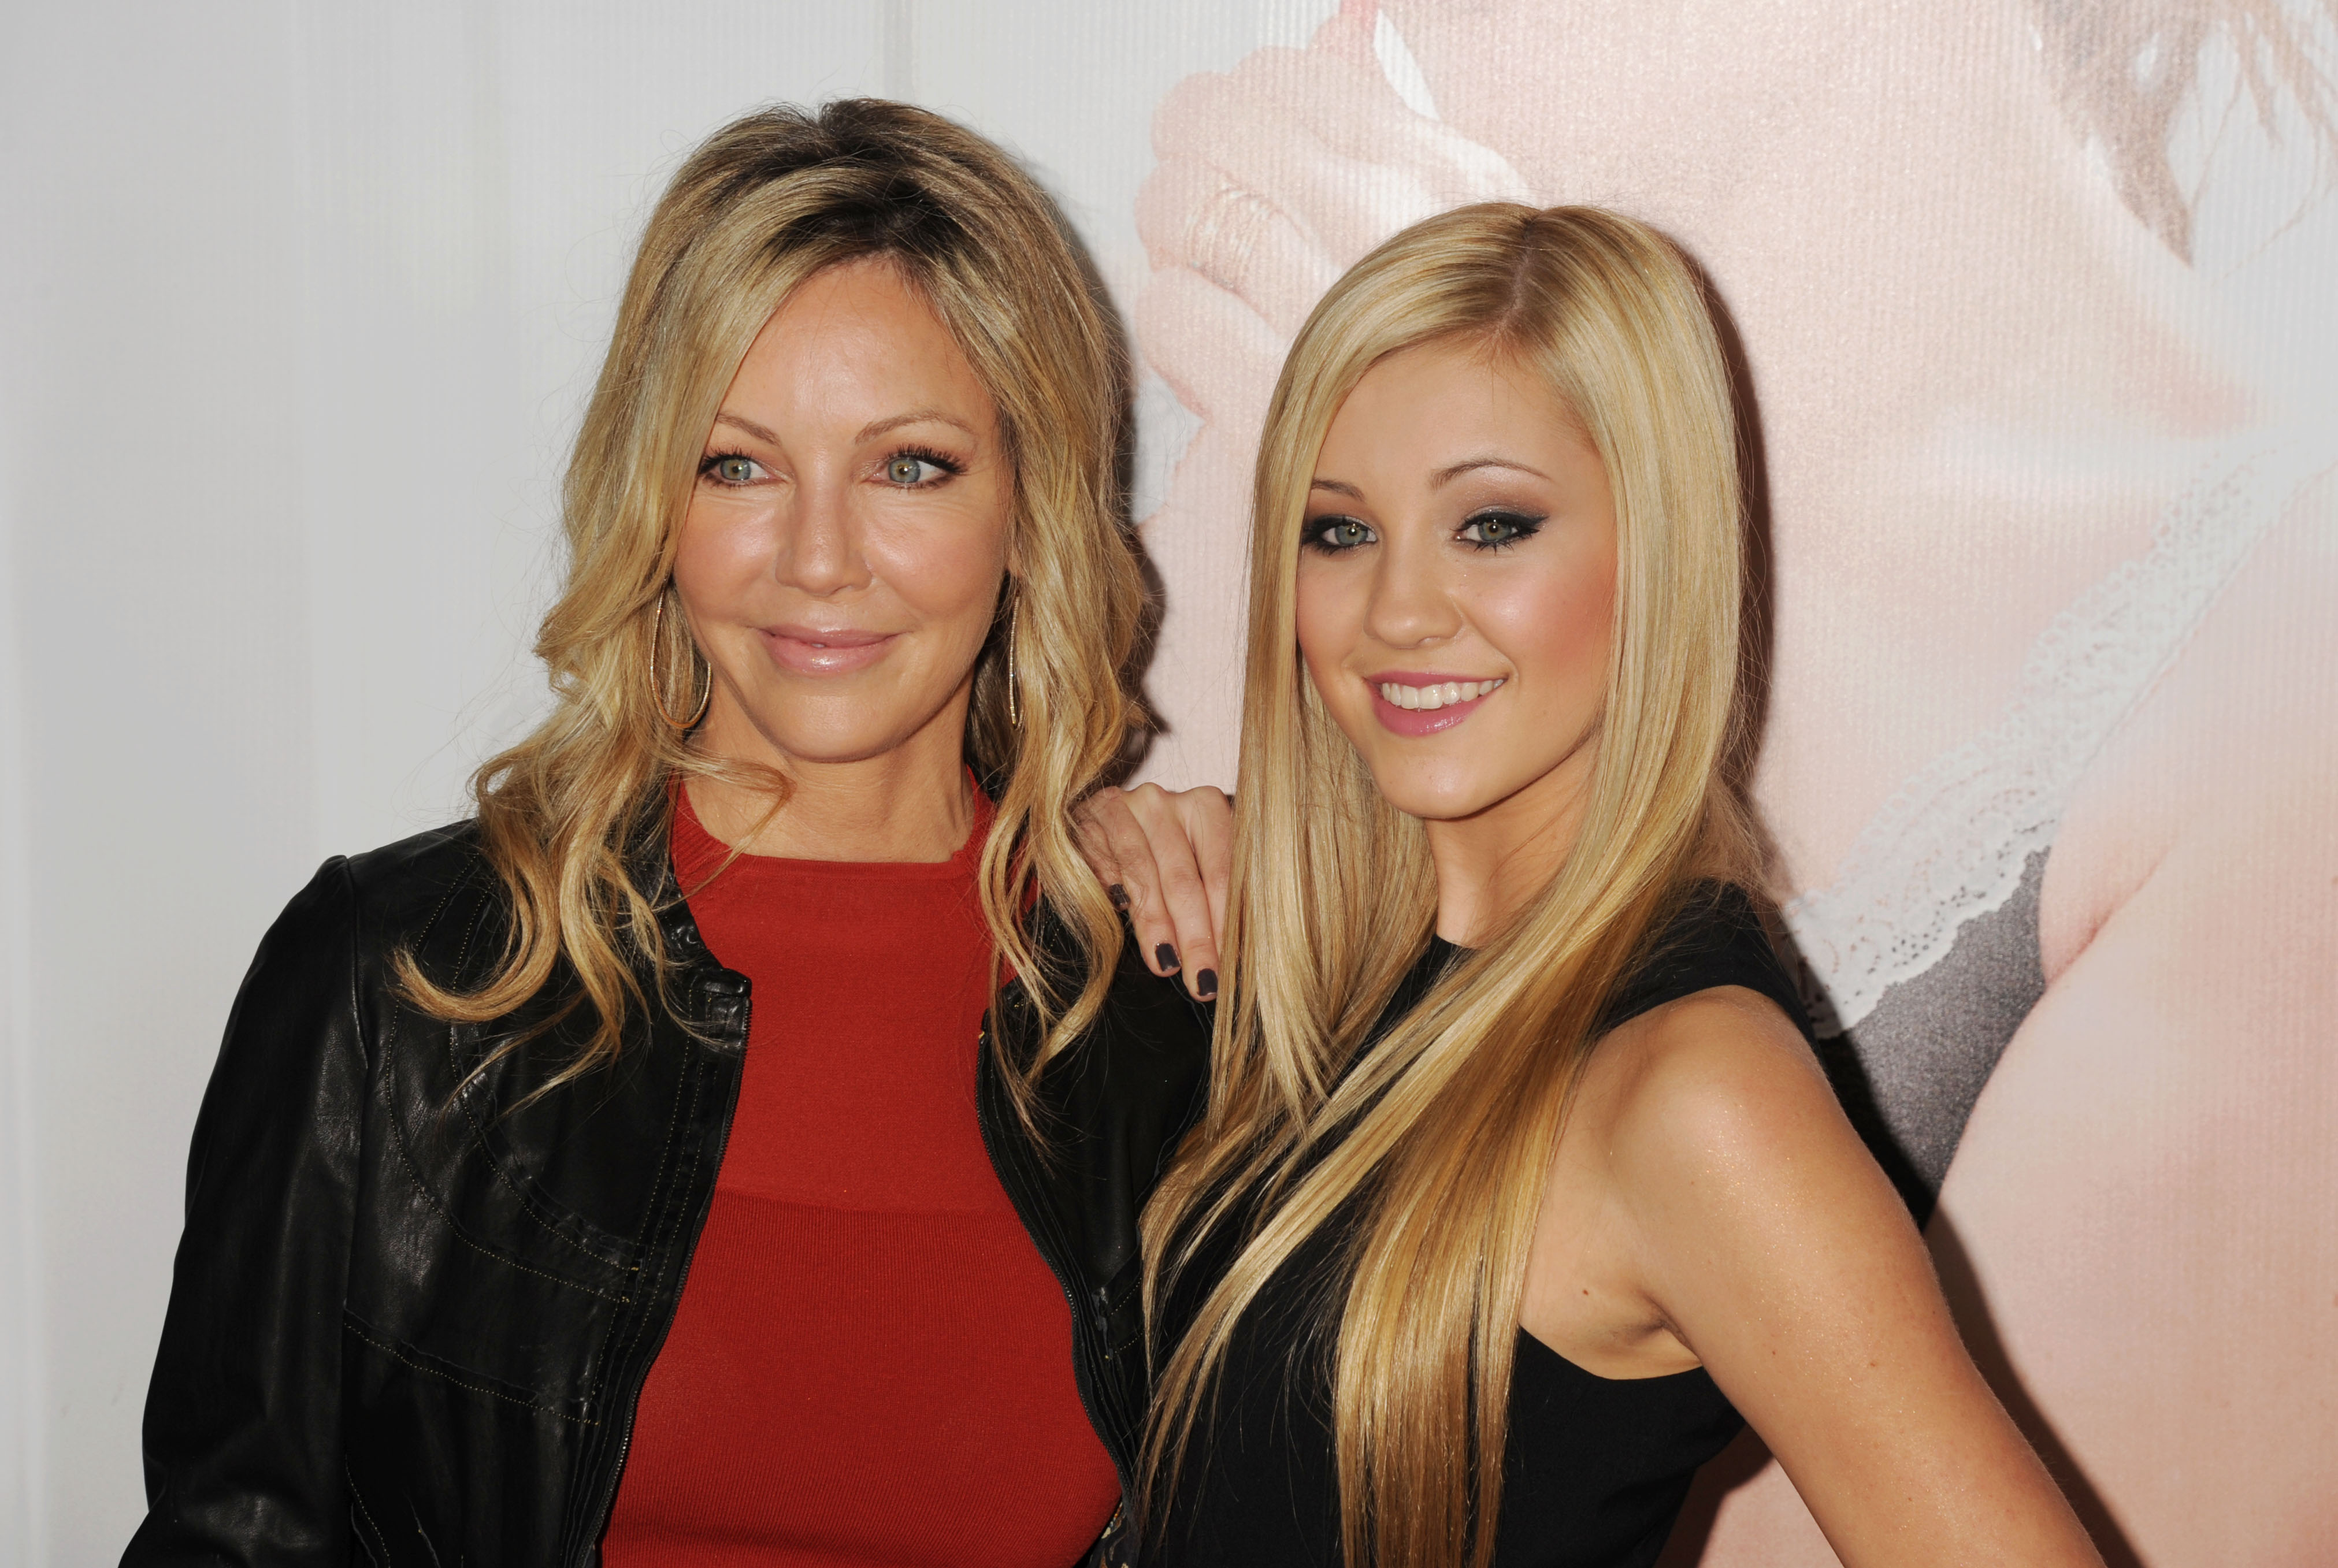 Heather Locklear and Ava Sambora at the "This Is 40" - Los Angeles Premiere on December 12, 2012 in Hollywood, California | Source: Getty Images